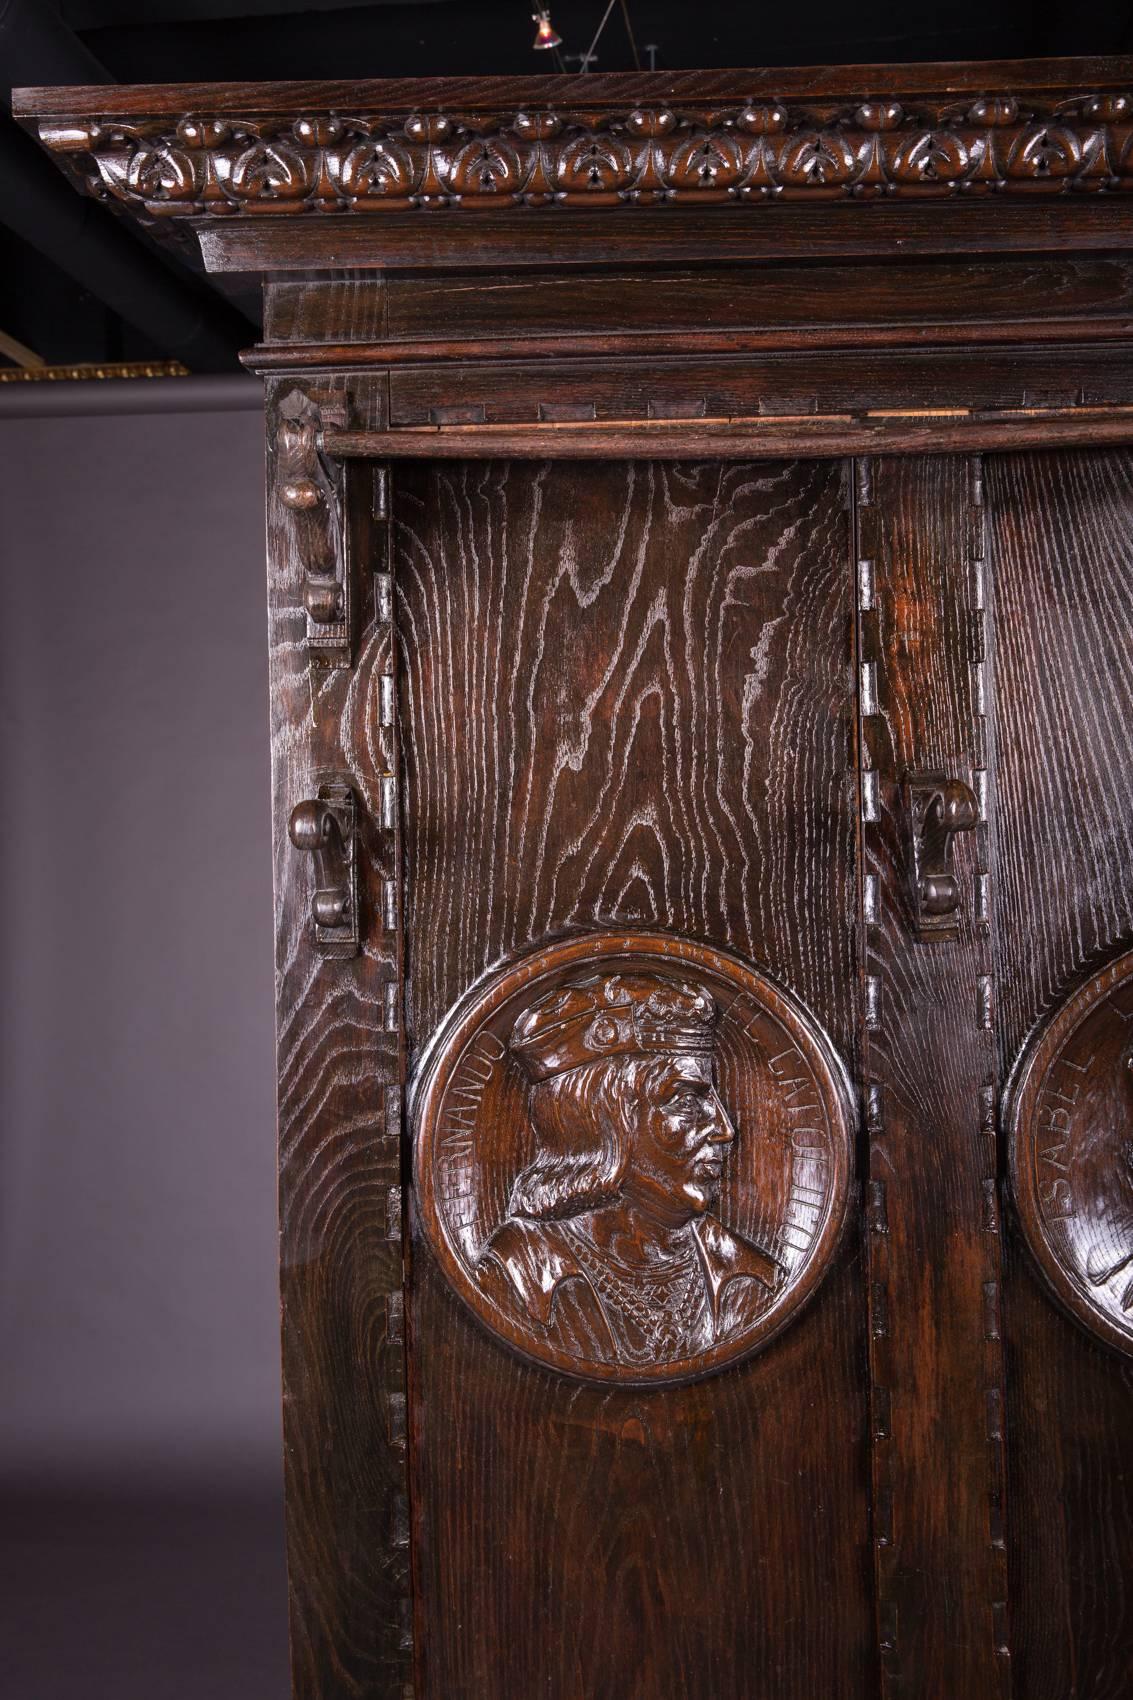 Solid oak. High-quality carving with medallion carvings. Both containers also with rich carvings.

(V-123).